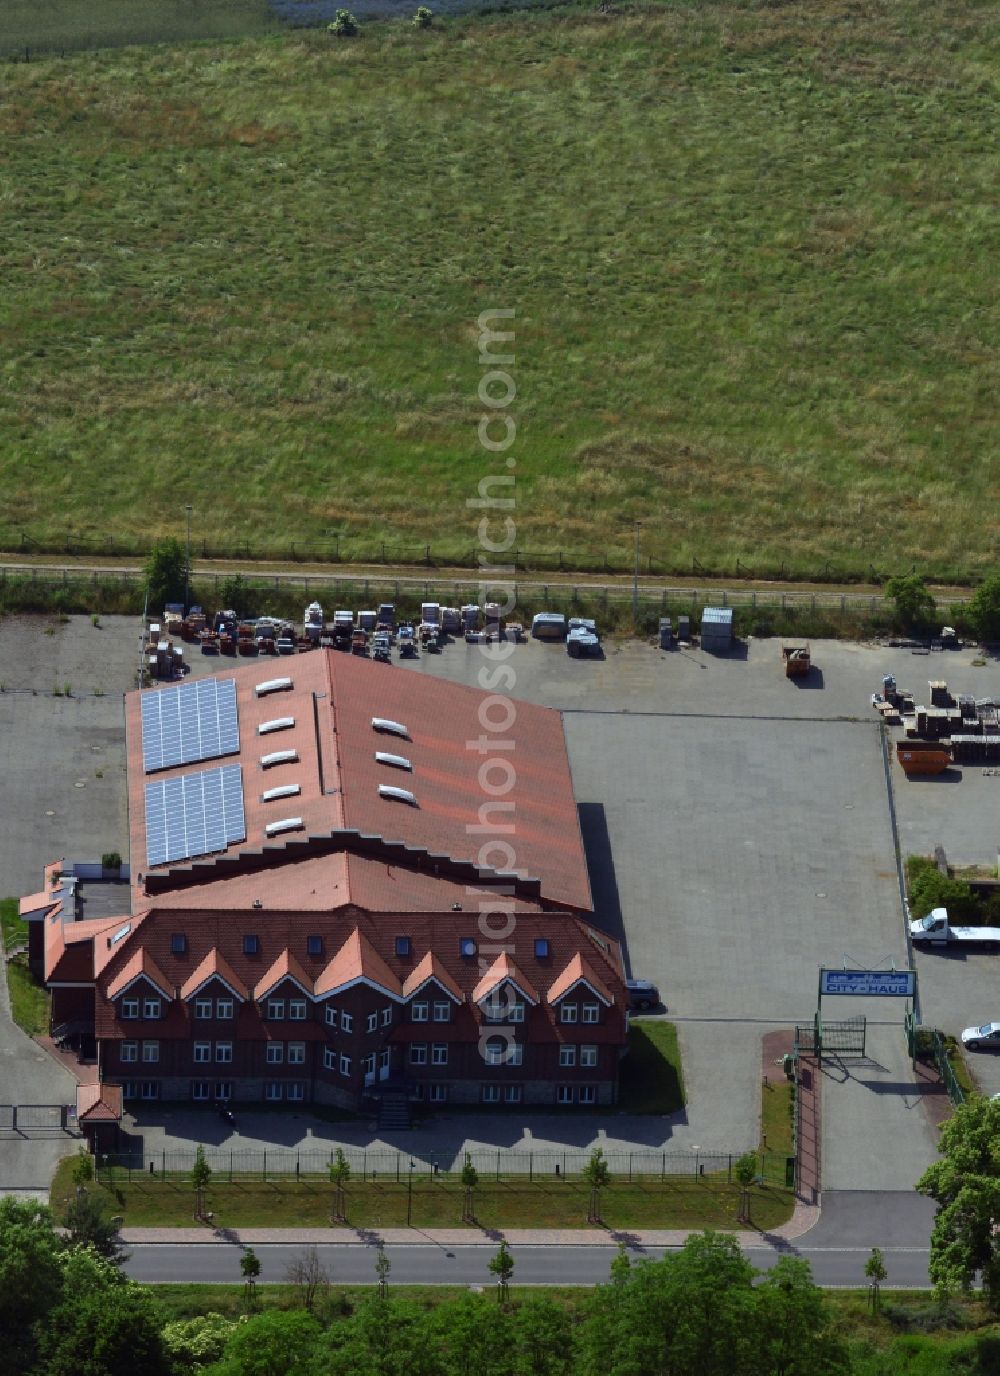 Aerial image Wegendorf - View of the facility of CITY-HAUS Bauhof Wegendorf in the Alte Dorfstrasse in Wegendorf. In addition to that the MBUTT Service-und Handelsgesellschaft mbH has its domicile there